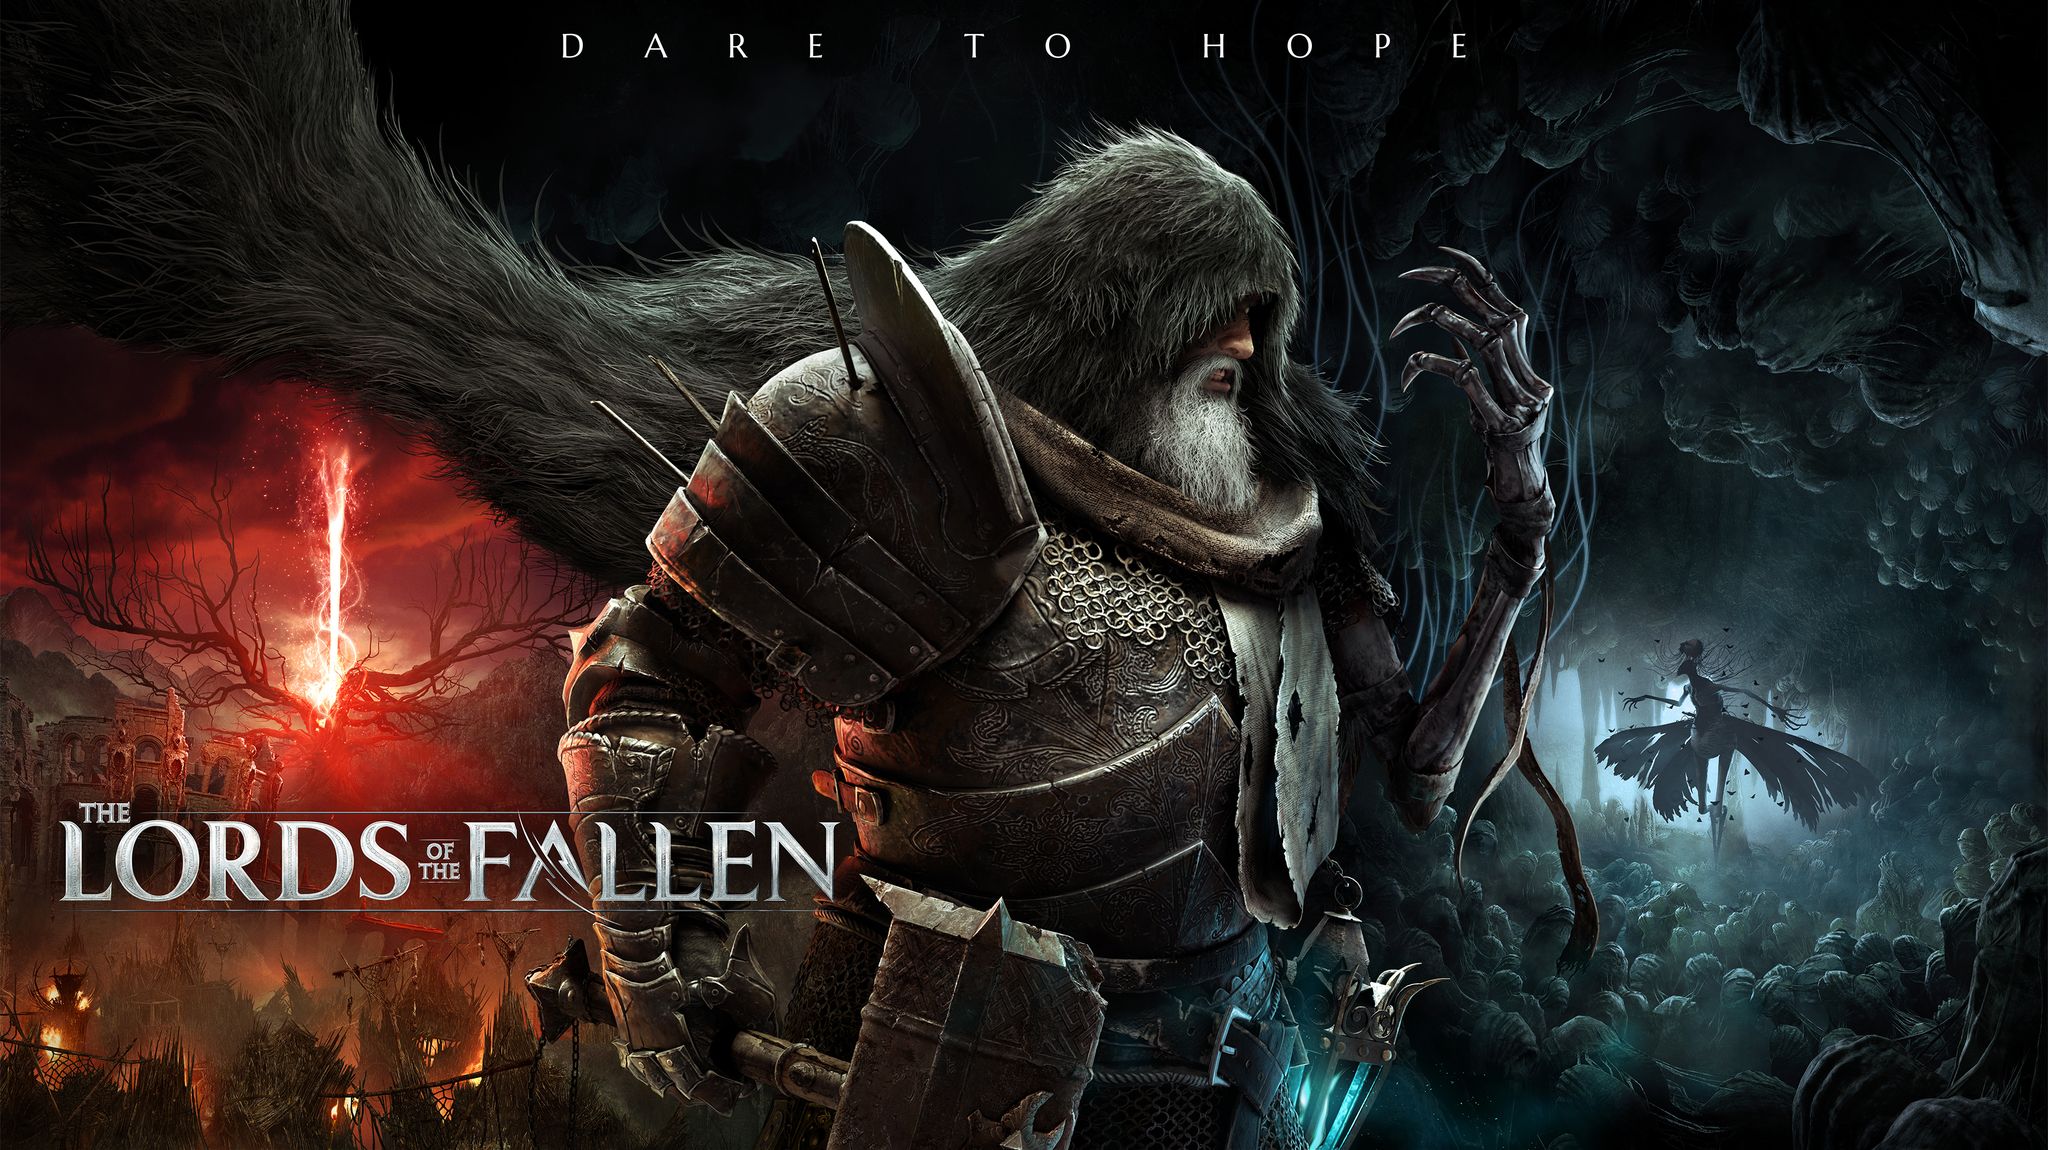 the-lords-of-the-fallen-gameplay-trailer-debuts-at-the-game-awards